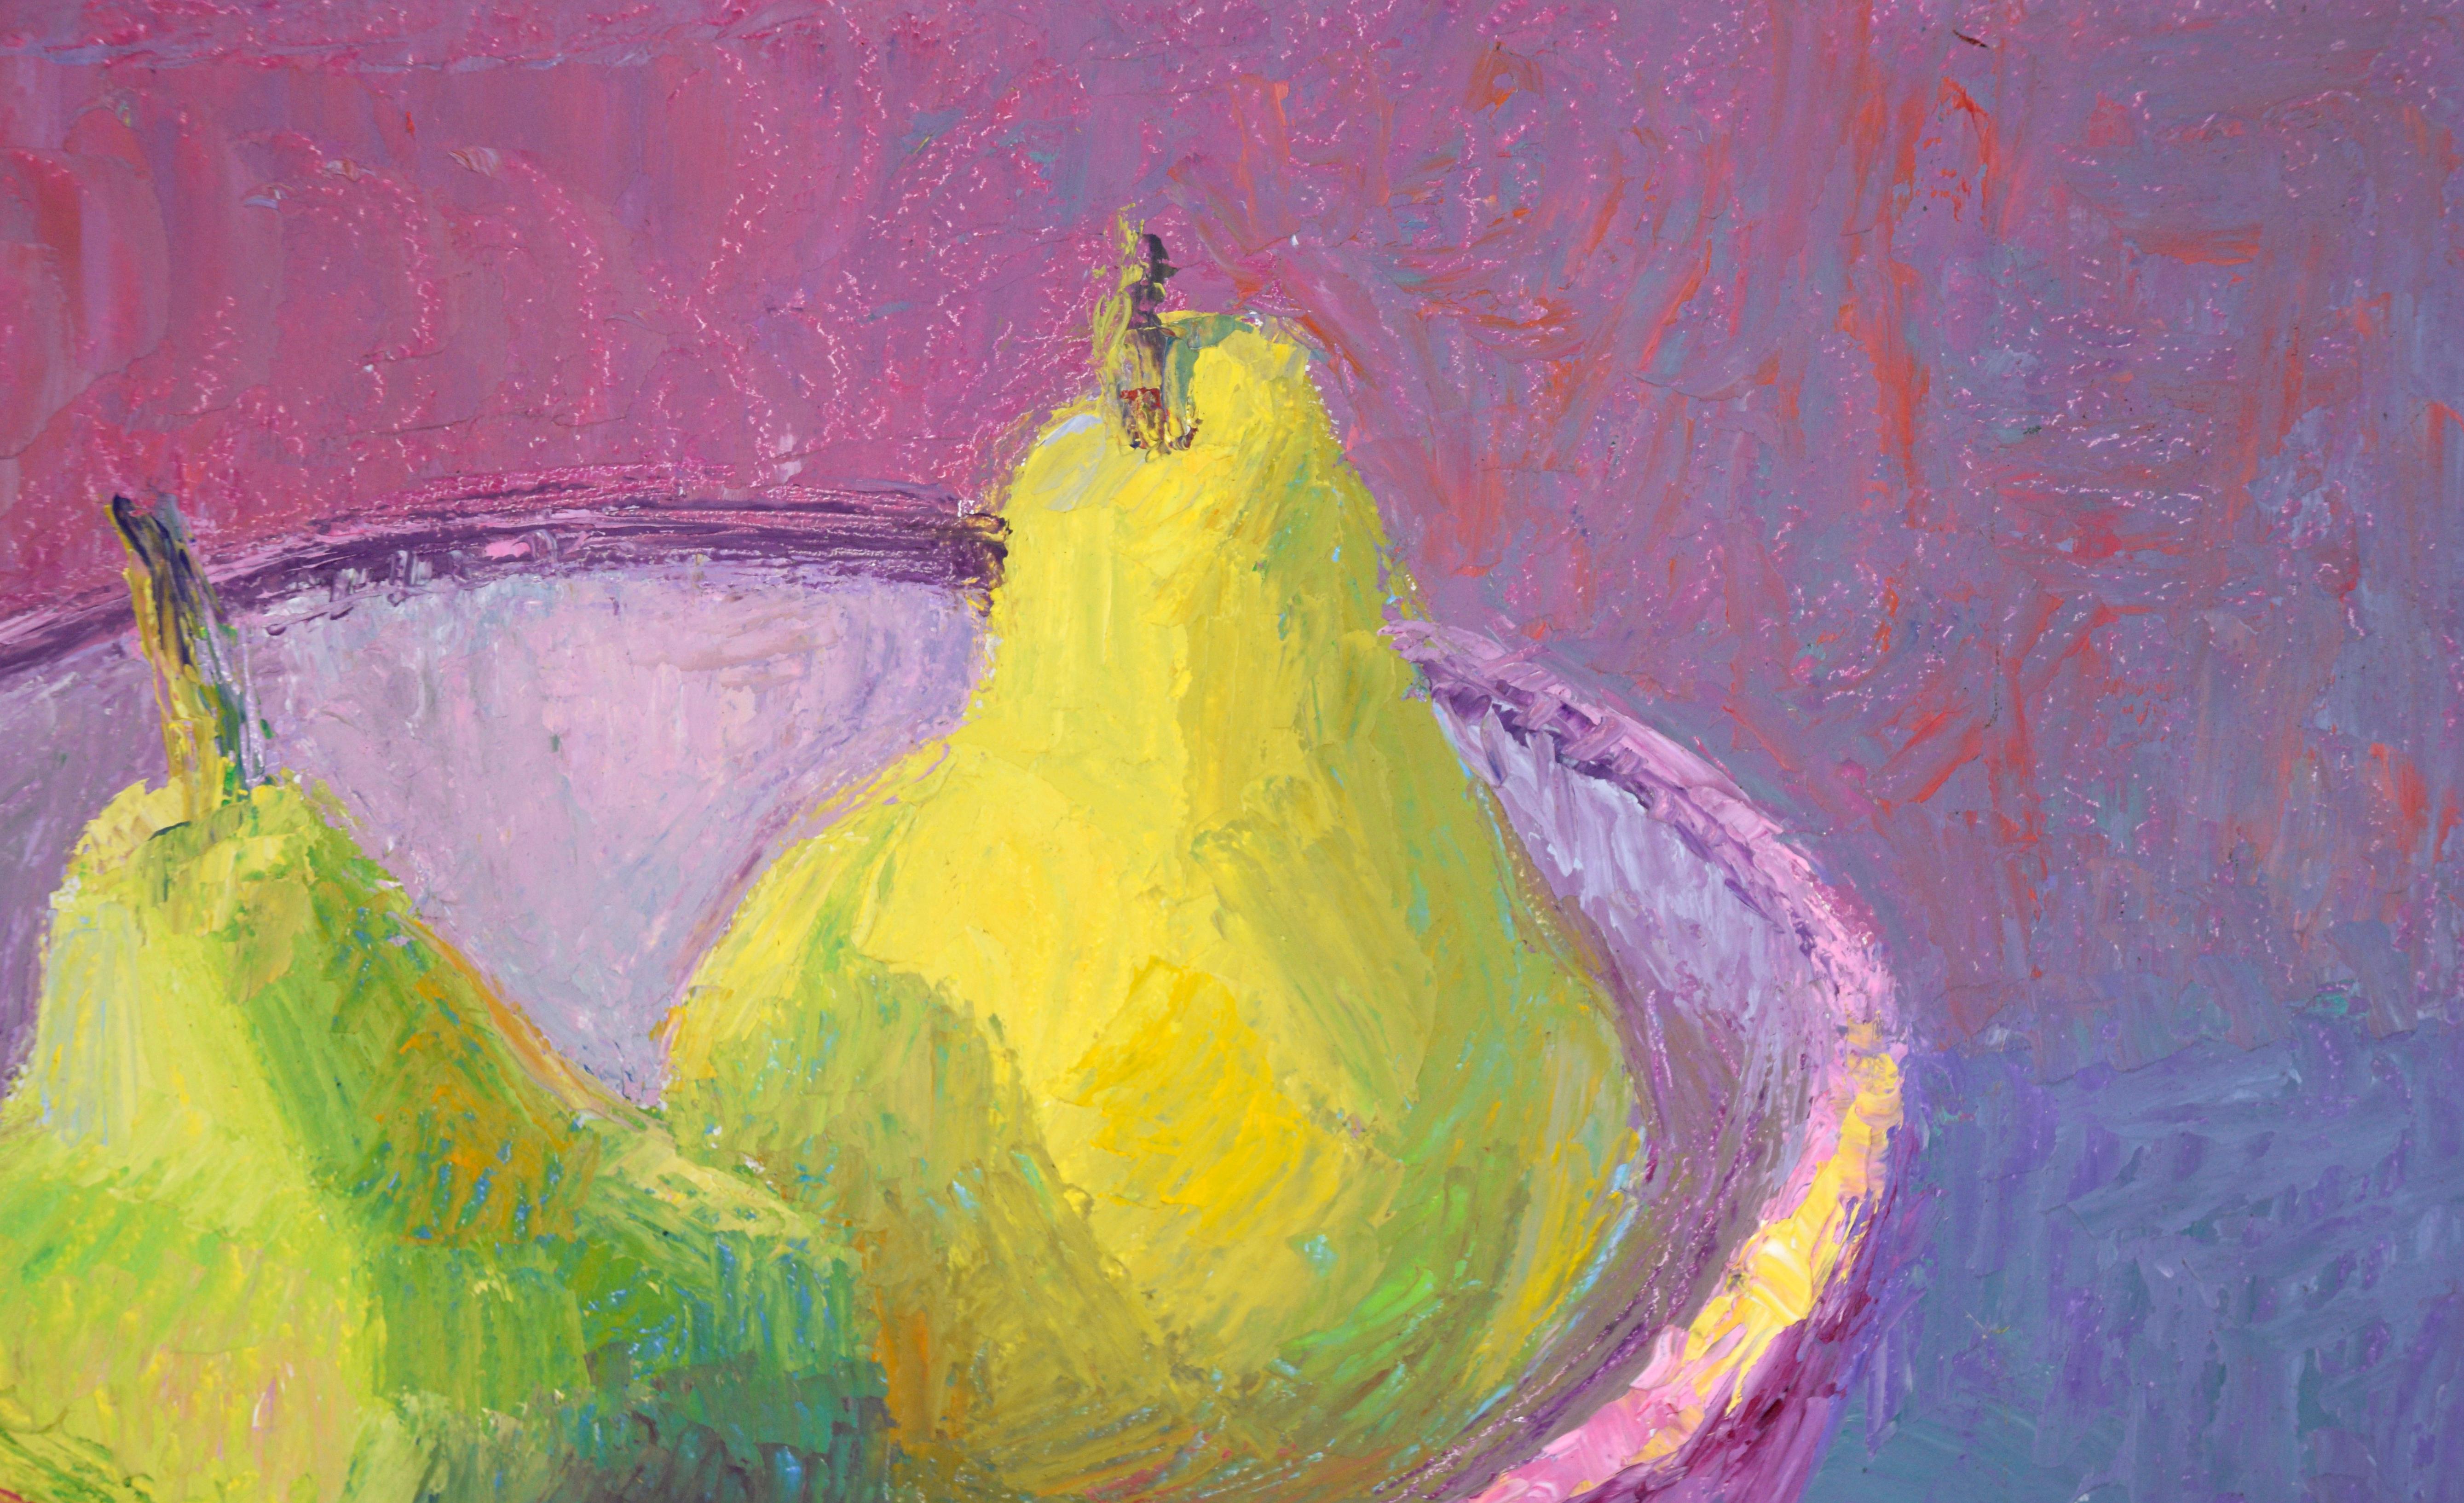 Green Pears in a Purple Bowl -Still Life in Oil on Masonite - Painting by Susan Sarback